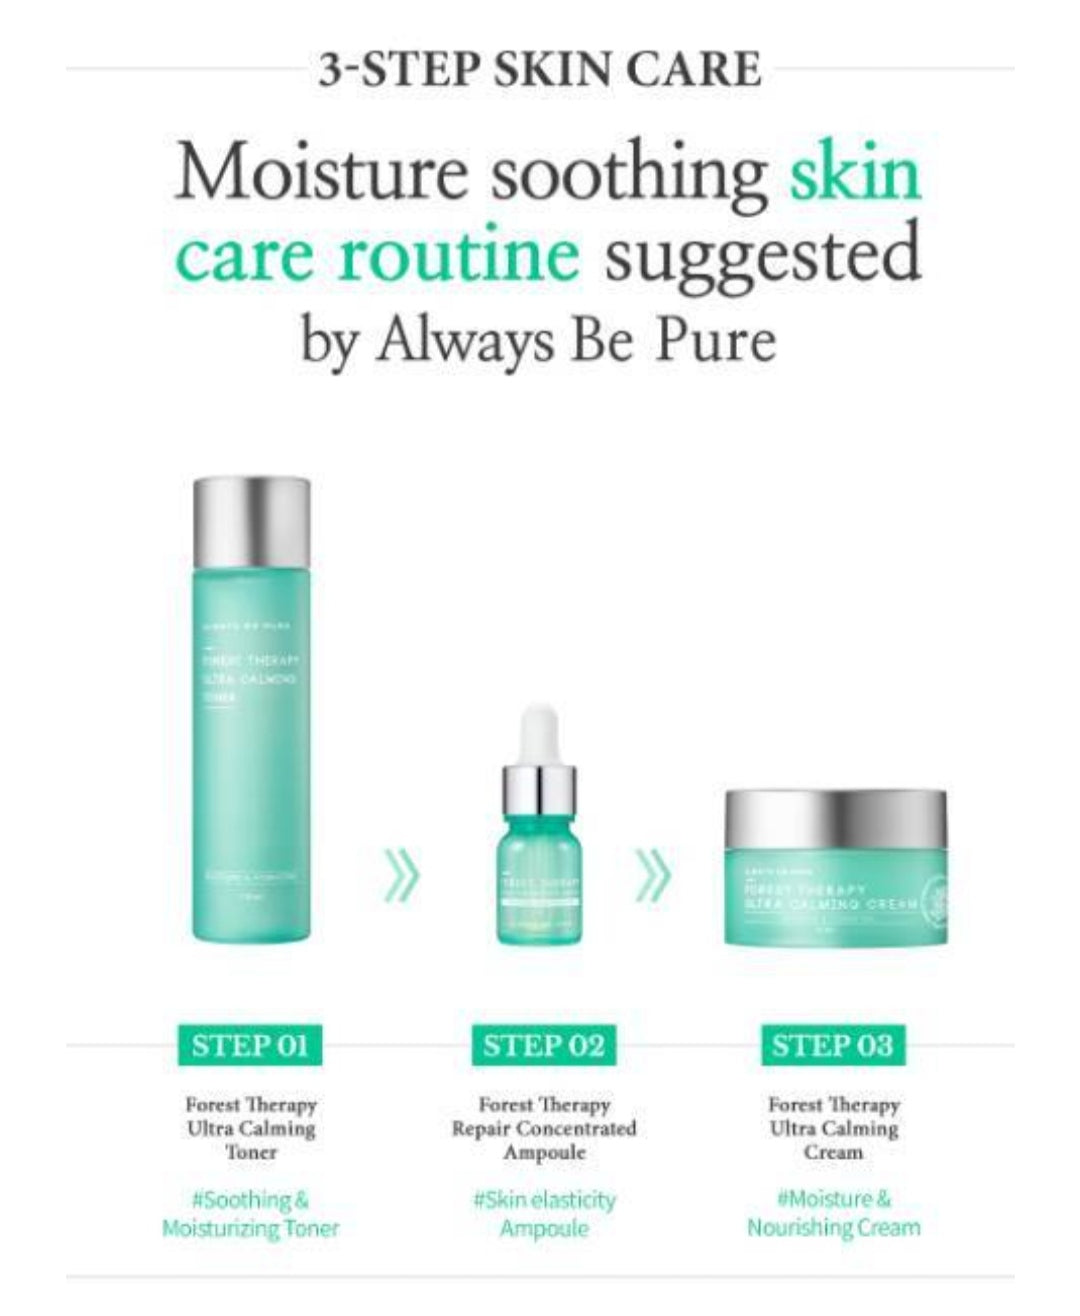 Forest Therapy Ultra Calming Cream